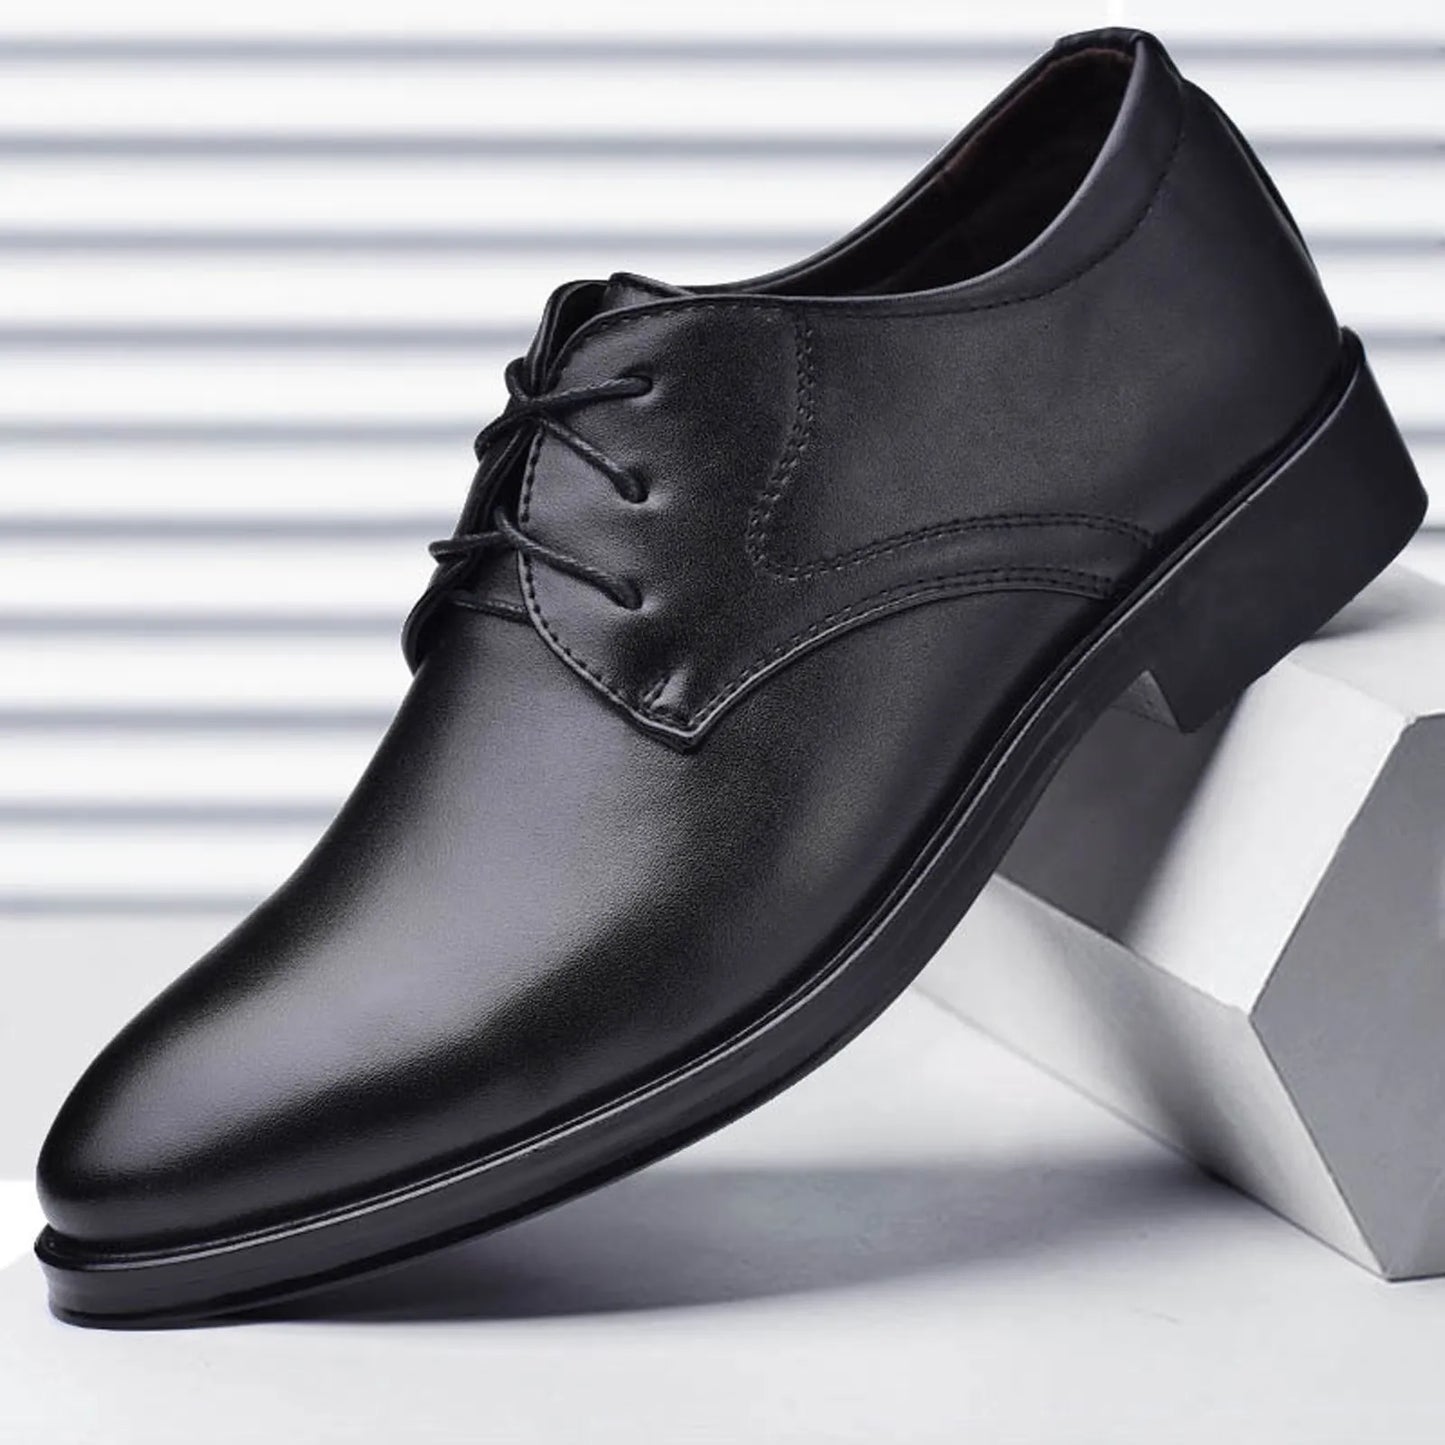 Men Dress Shoes Wedding Oxford Shoes Classic/Business Formal Pointed Toe Leather Shoes